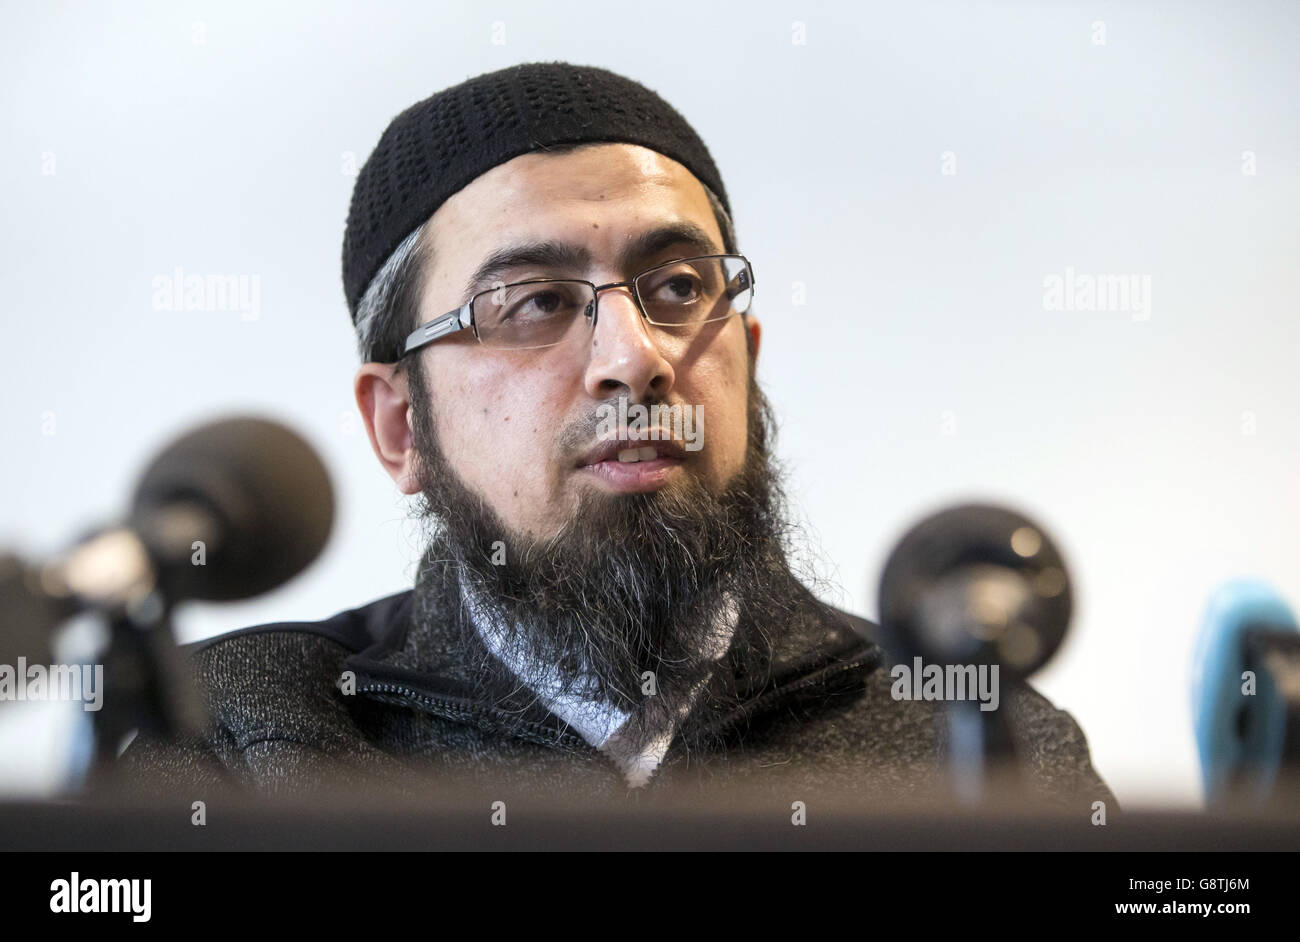 Glasgow Central Mosque imam Habib ur Rehman, who has been criticised for allegedly praising an extremist who was executed in Pakistan after murdering a politician, during a press conference at Hampden Park in Glasgow to condemn the recent terror attacks around the world and death of shopkeeper Asad Shah in Glasgow. Stock Photo